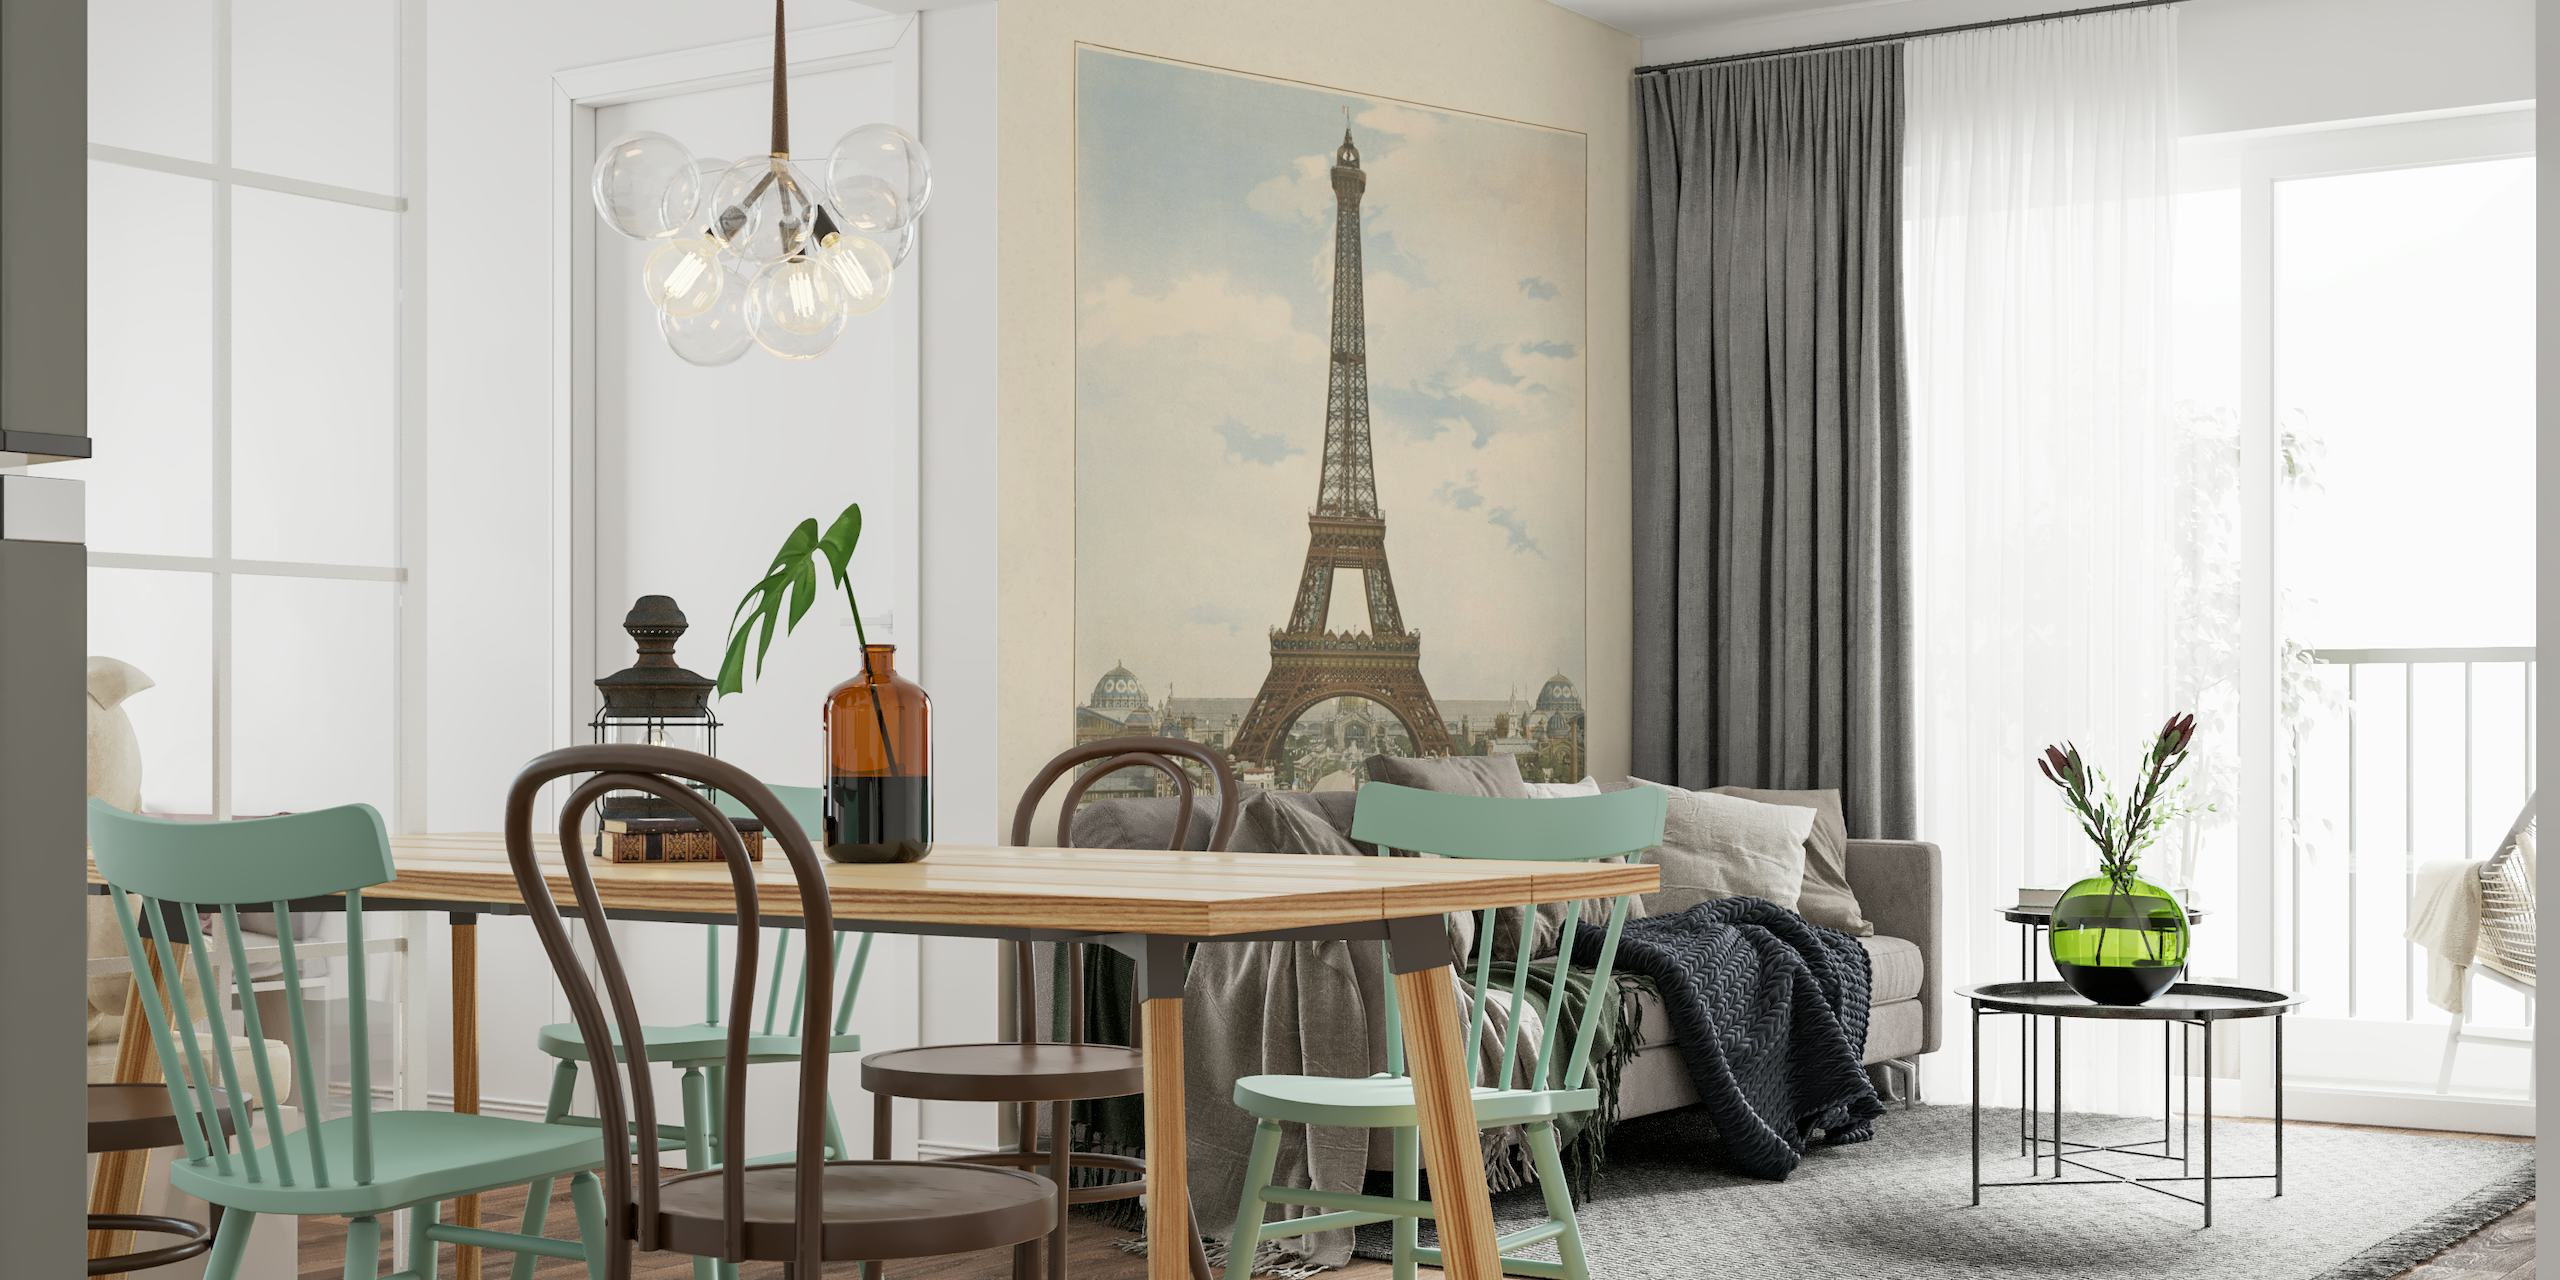 Vintage-style wall mural of the Eiffel Tower in Paris with surrounding architecture under a calm sky.